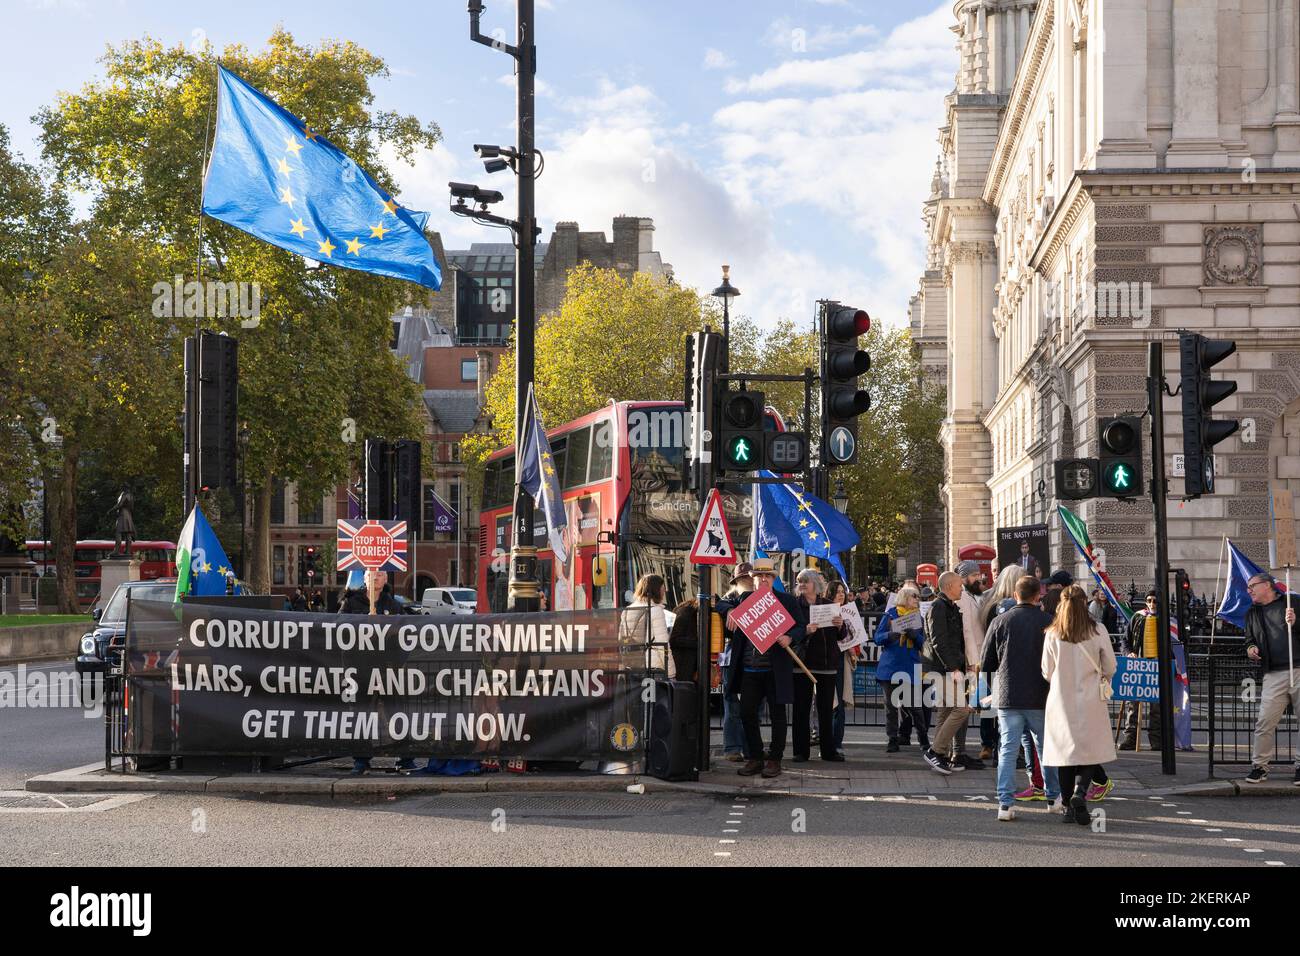 A protest group on Parliament St, London, protesting against the Tory Party and Brexit, with a banner saying 'Corrupt Tory Government...' 9th Nov 2022 Stock Photo